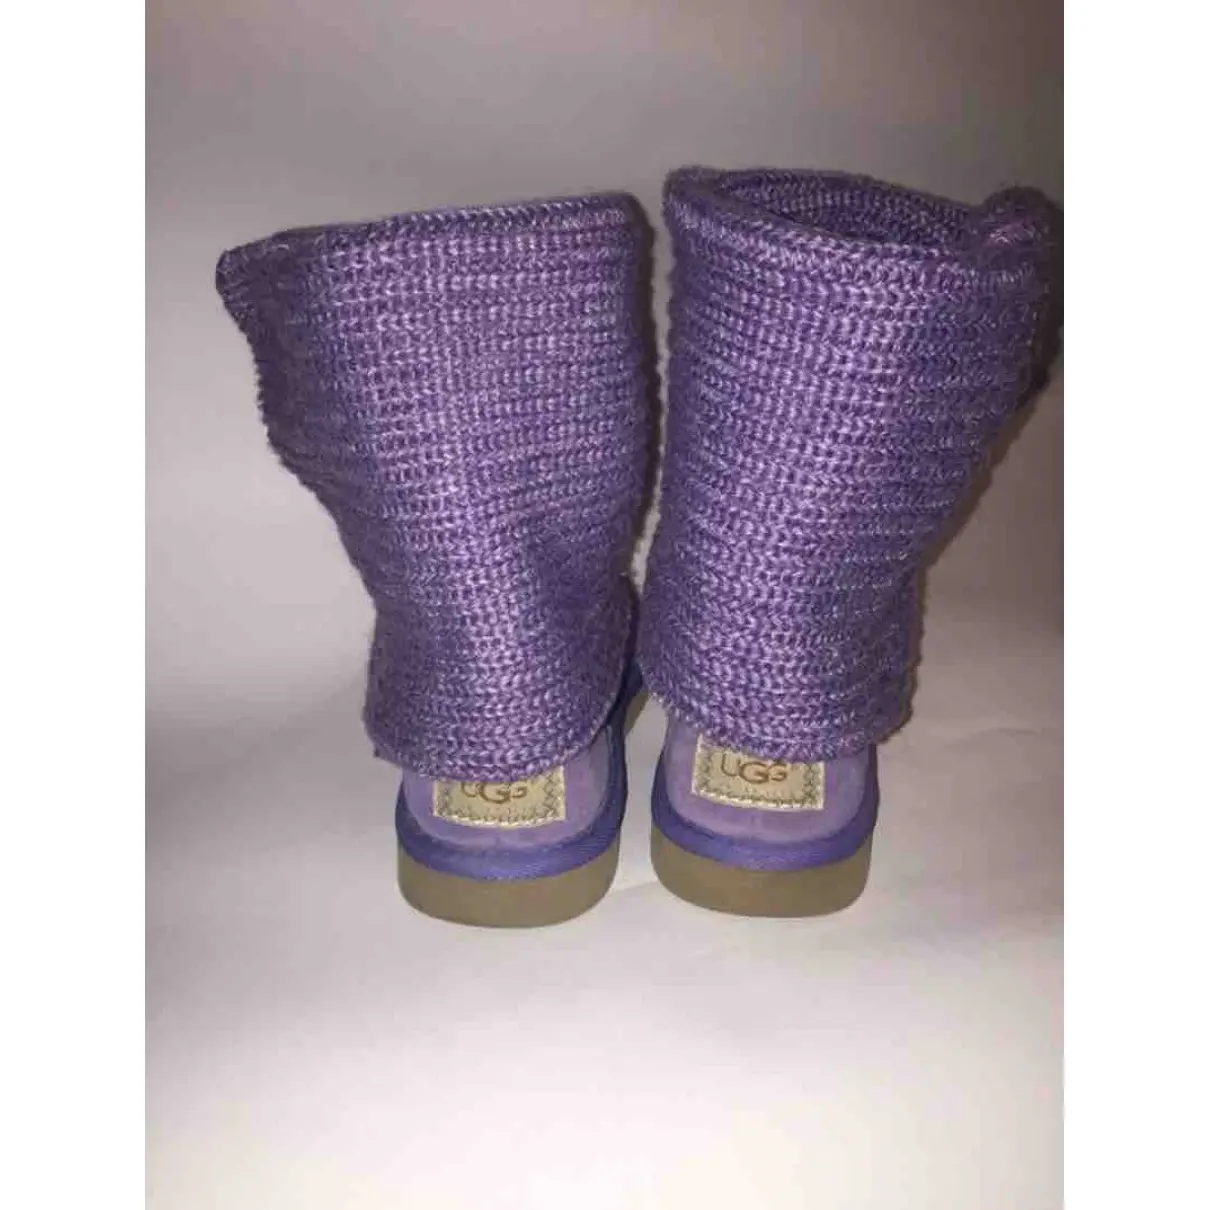 Buy Ugg Cloth snow boots online